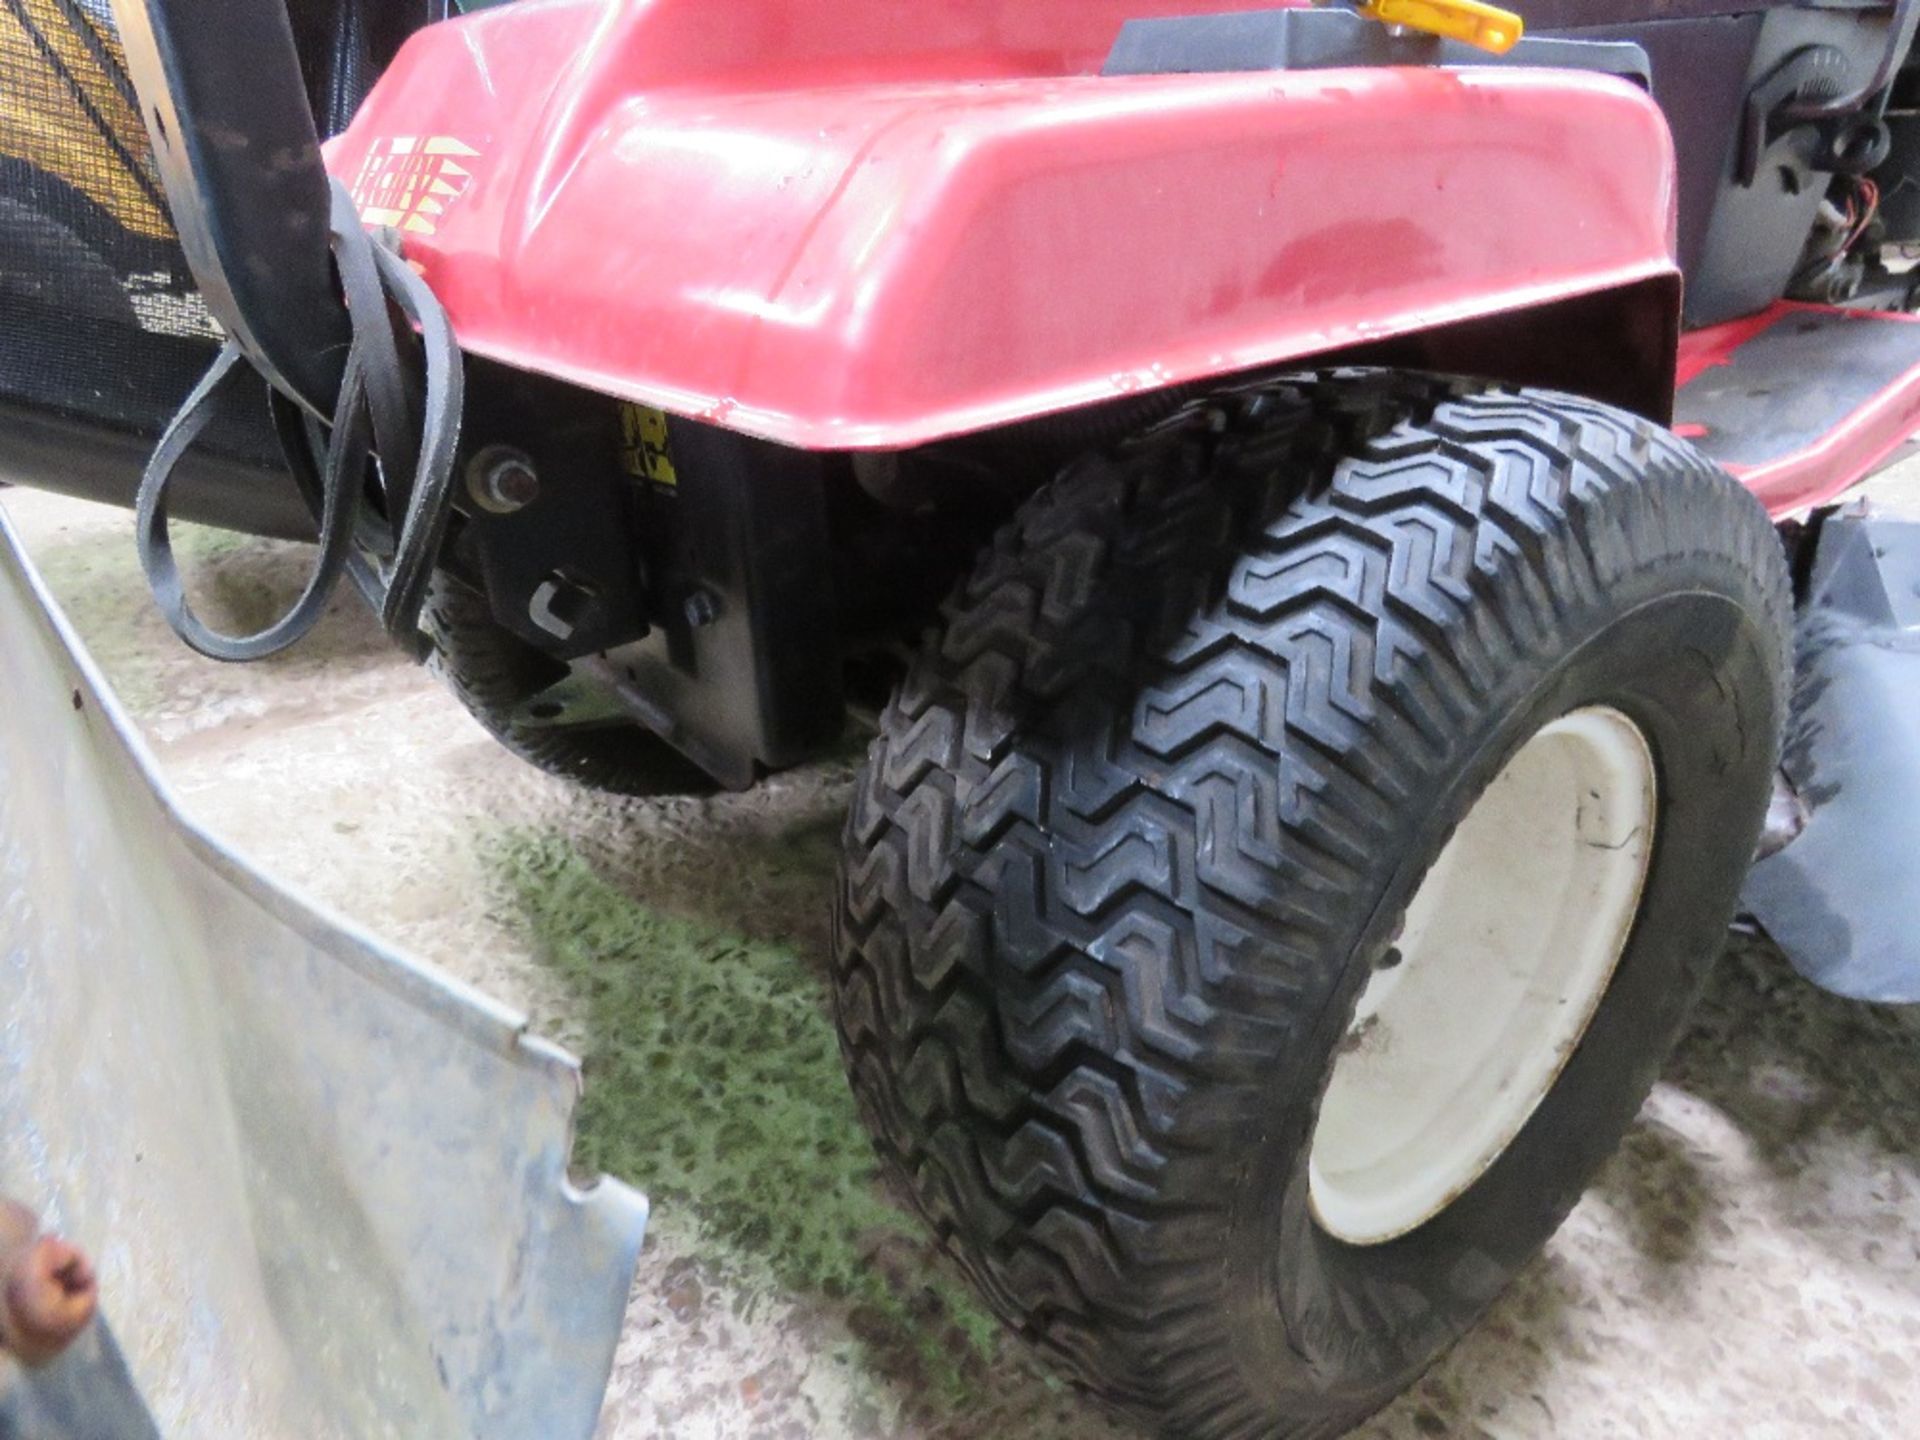 RALLY 12HP RIDE ON MOWER. WHEN BRIEFLY TESTED WAS SEEN TO RUN AND MOWERS ENGAGED. - Image 5 of 7